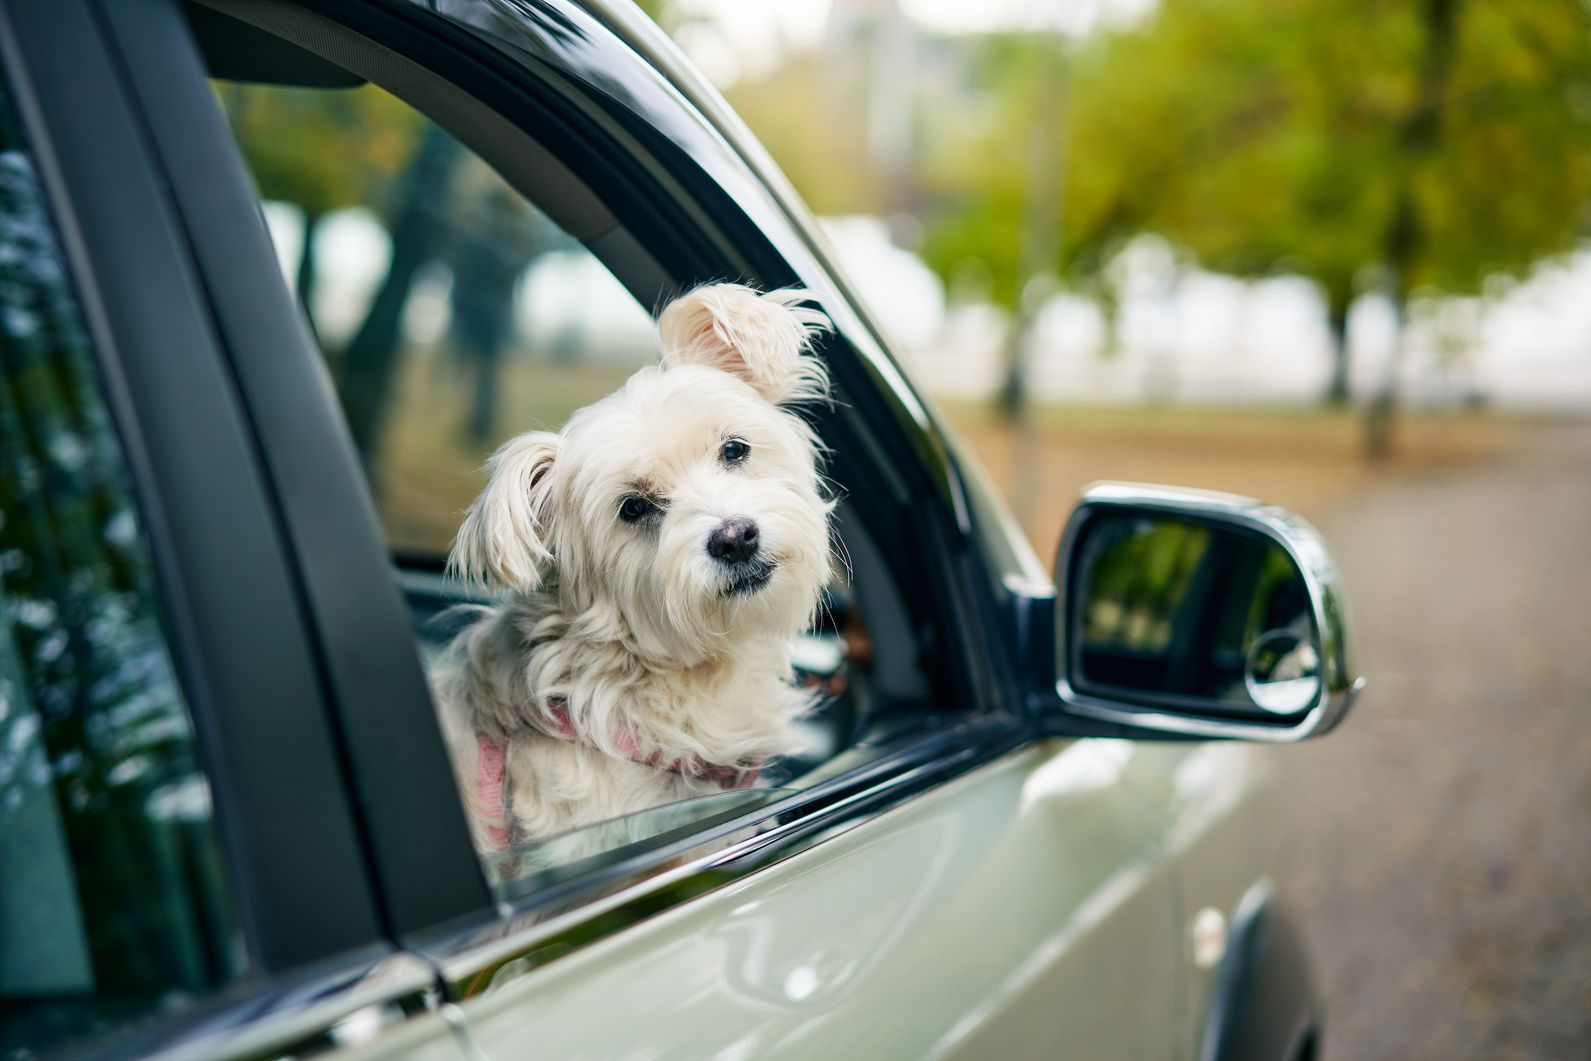 Cute Fluffy Dog Looking Out of Car Window. Road Trip Concept